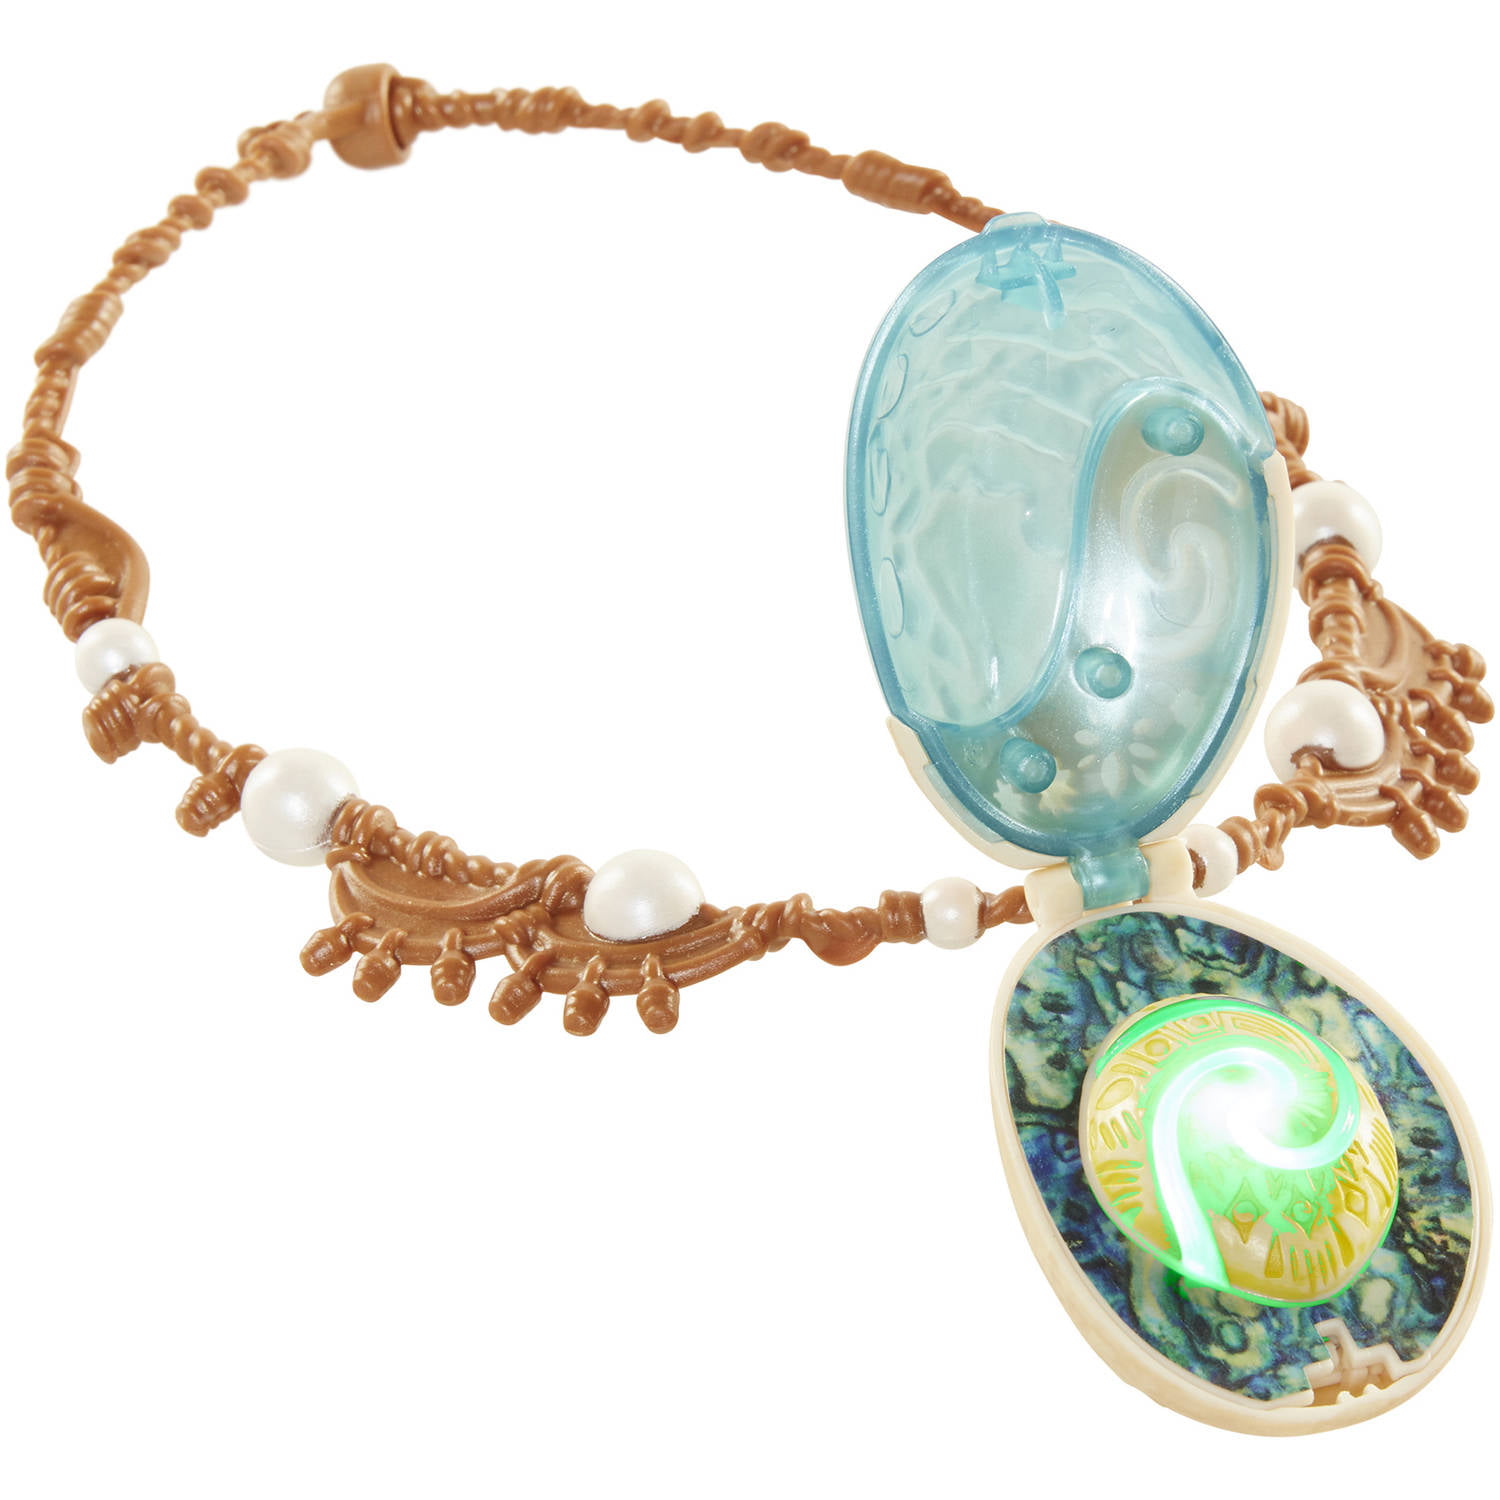 Disney Princess Moana Magical Seashell Necklace for sale online